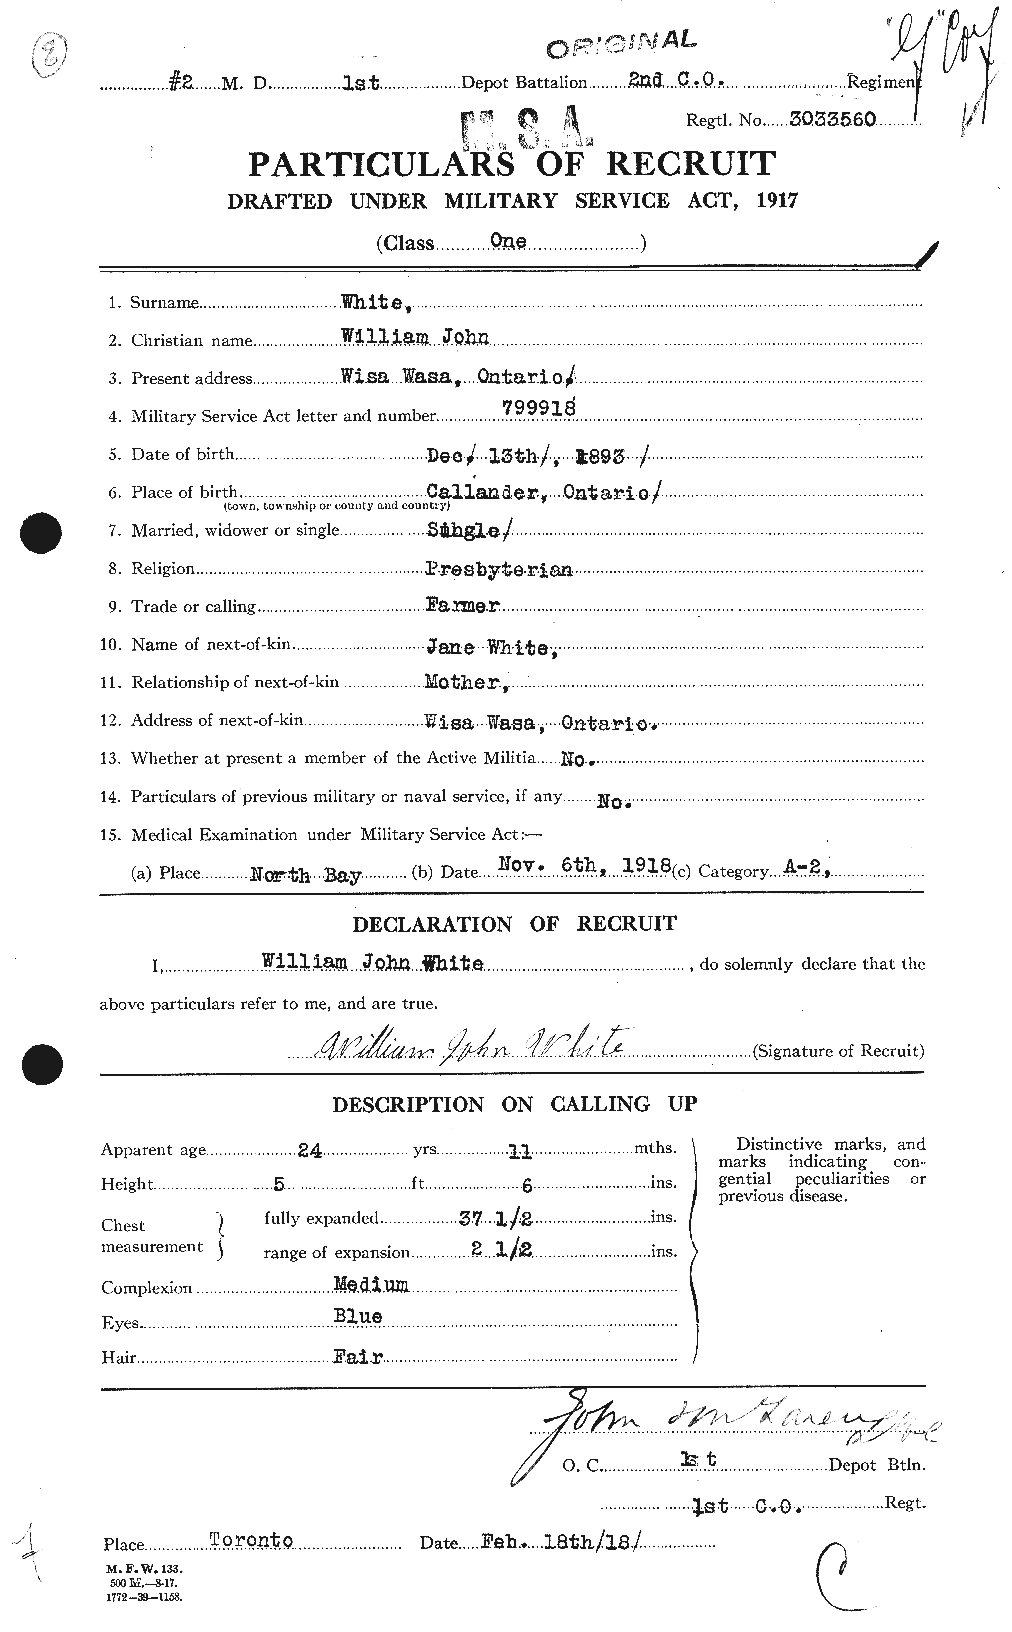 Personnel Records of the First World War - CEF 669052a